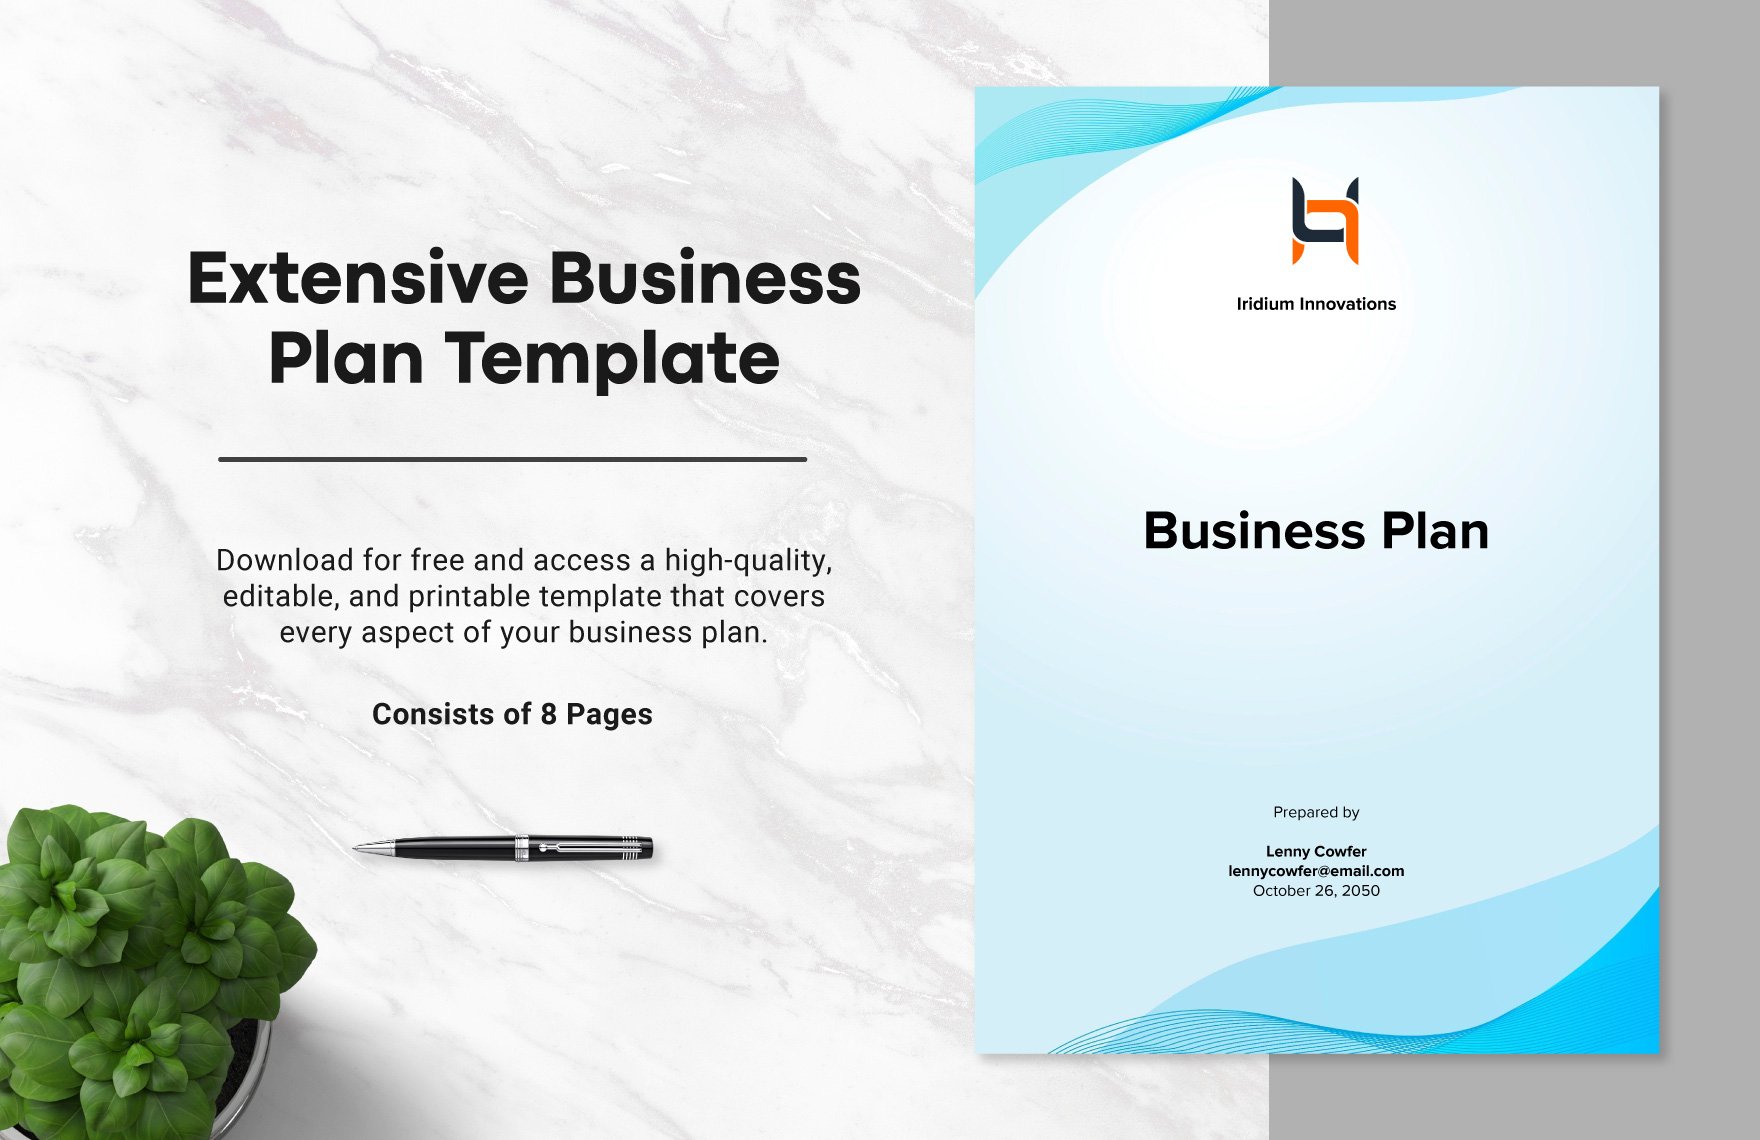 Extensive Business Plan Template in Word, Google Docs, PDF